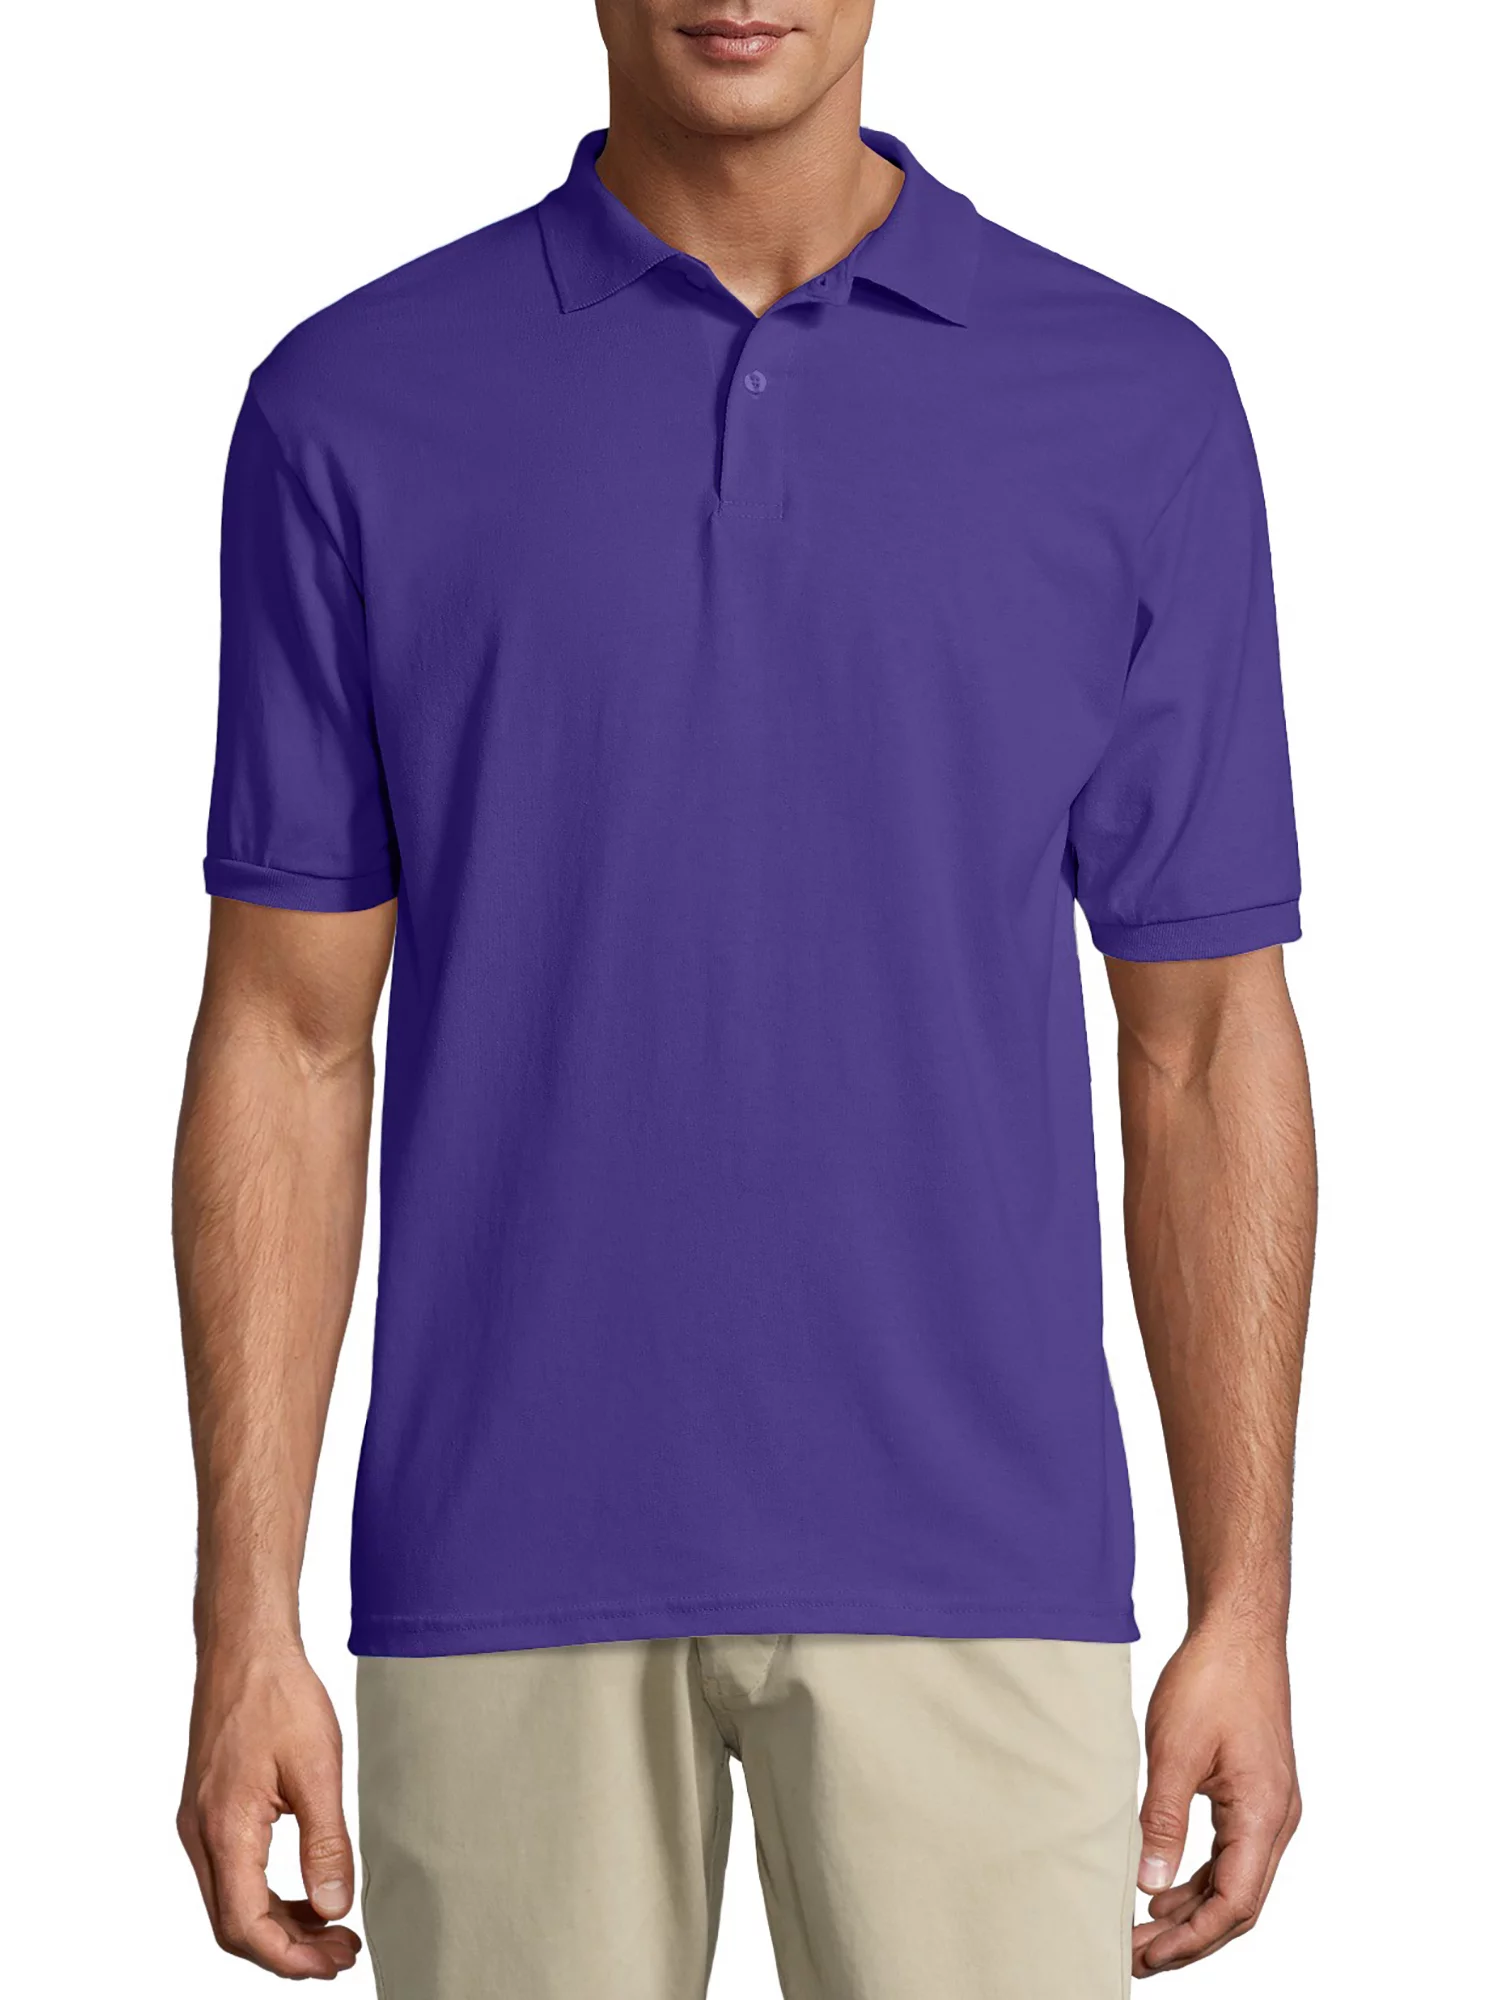 Discover the Comfort and Eco Friendliness of Hanes Mens EcoSmart Short Sleeve Jersey Polo Shirt